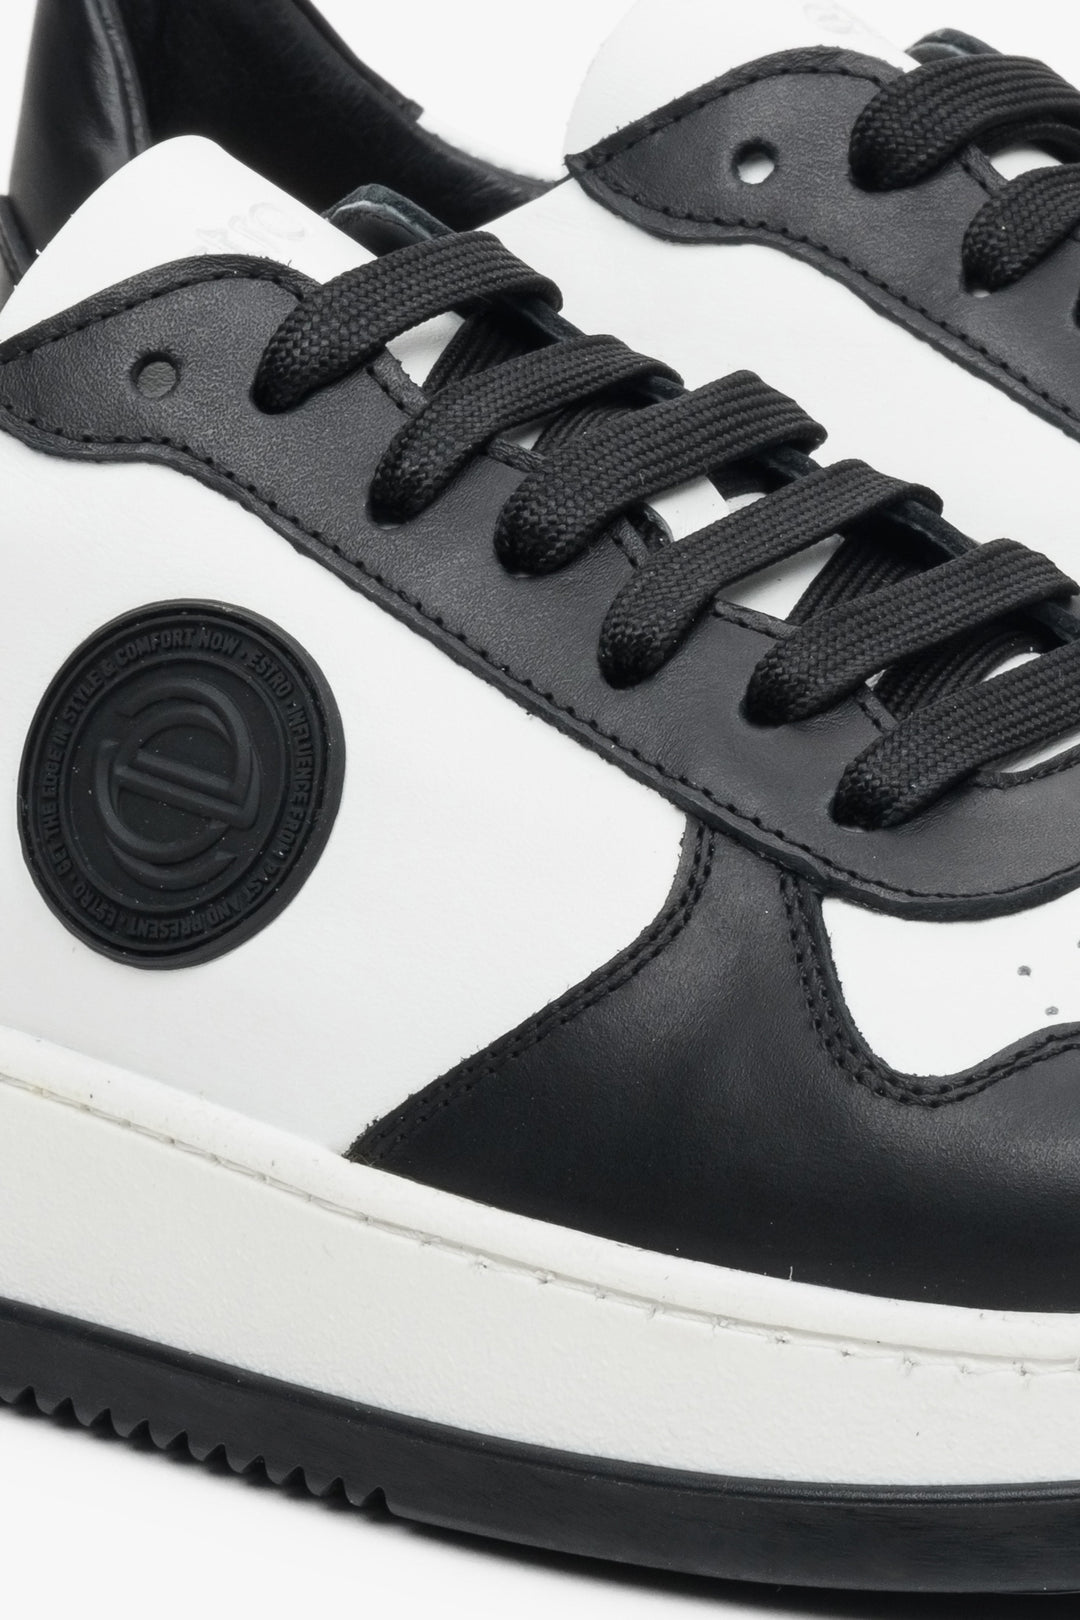 Men's sneakers made of Italian leather, black and white - close-up of details.